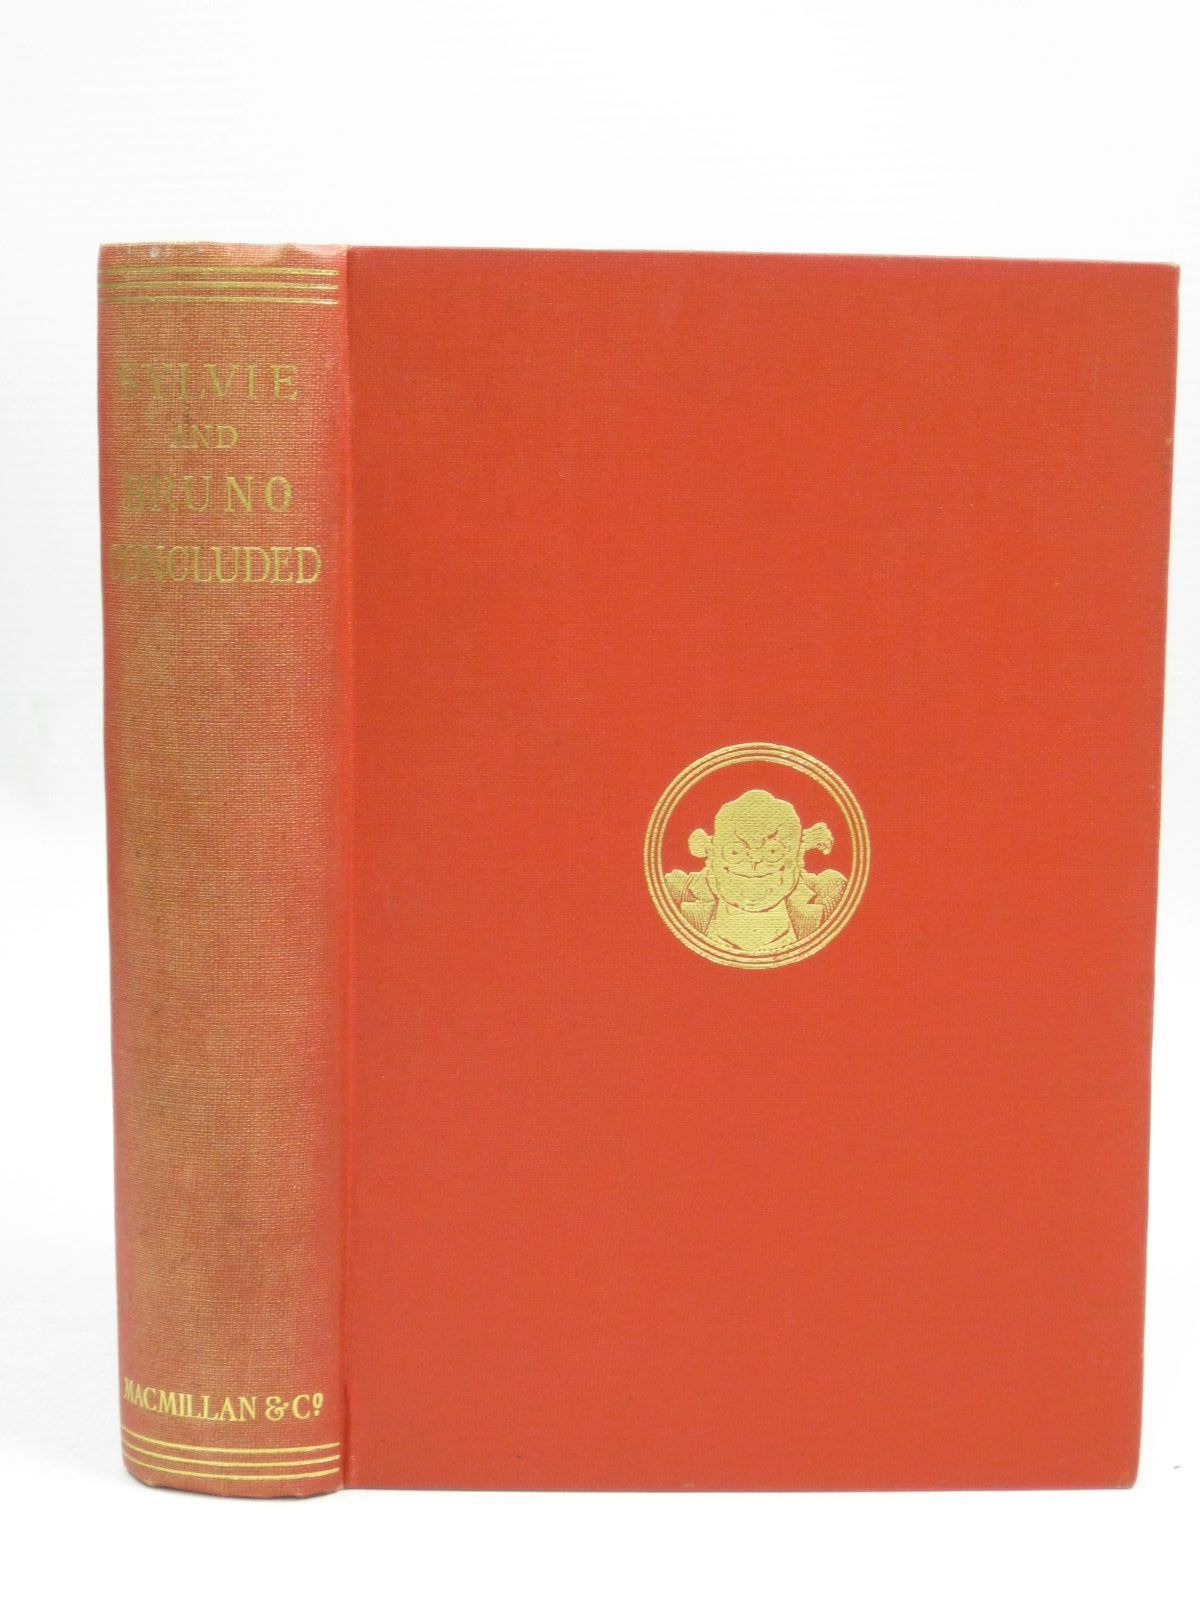 Photo of SYLVIE AND BRUNO CONCLUDED written by Carroll, Lewis illustrated by Furniss, Harry published by Macmillan & Co. (STOCK CODE: 1405774)  for sale by Stella & Rose's Books